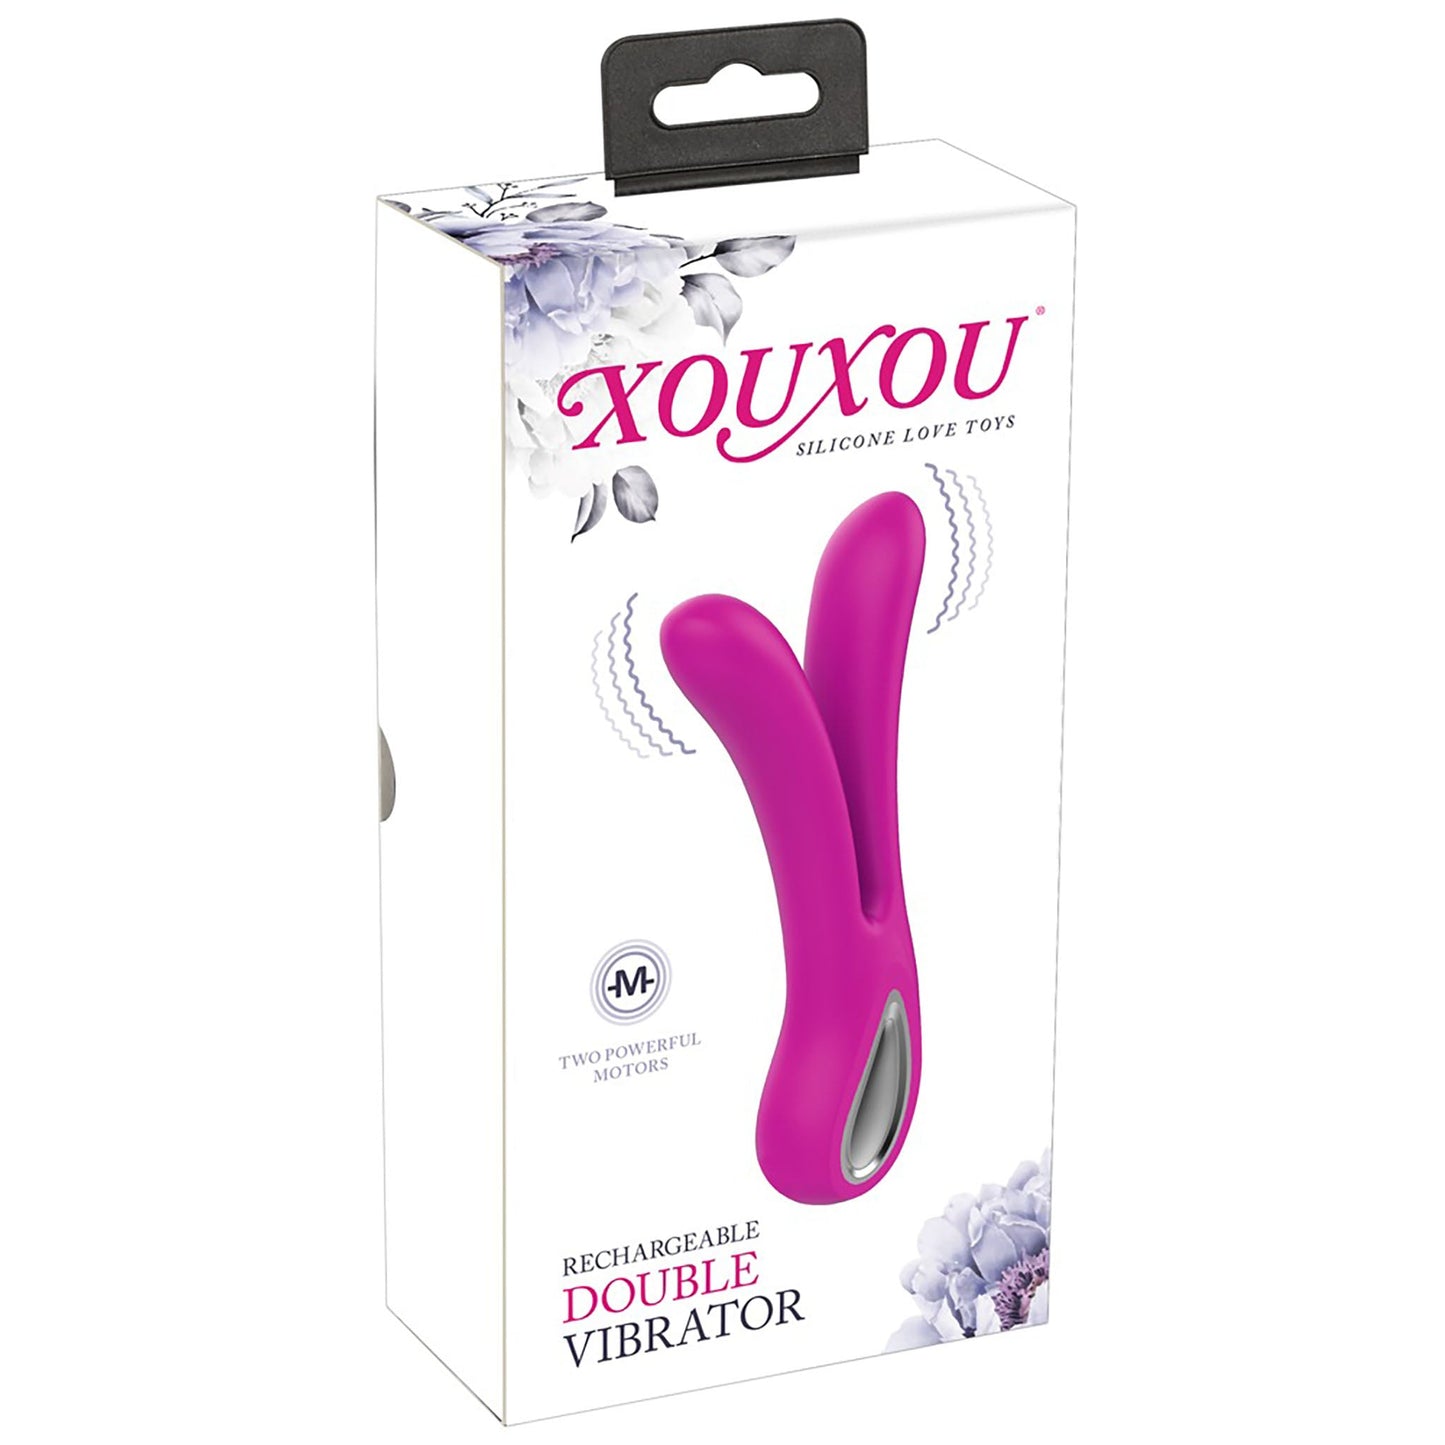 double-vibrator von XOUXOU, Doppelvibrator in lila, in Verpackung